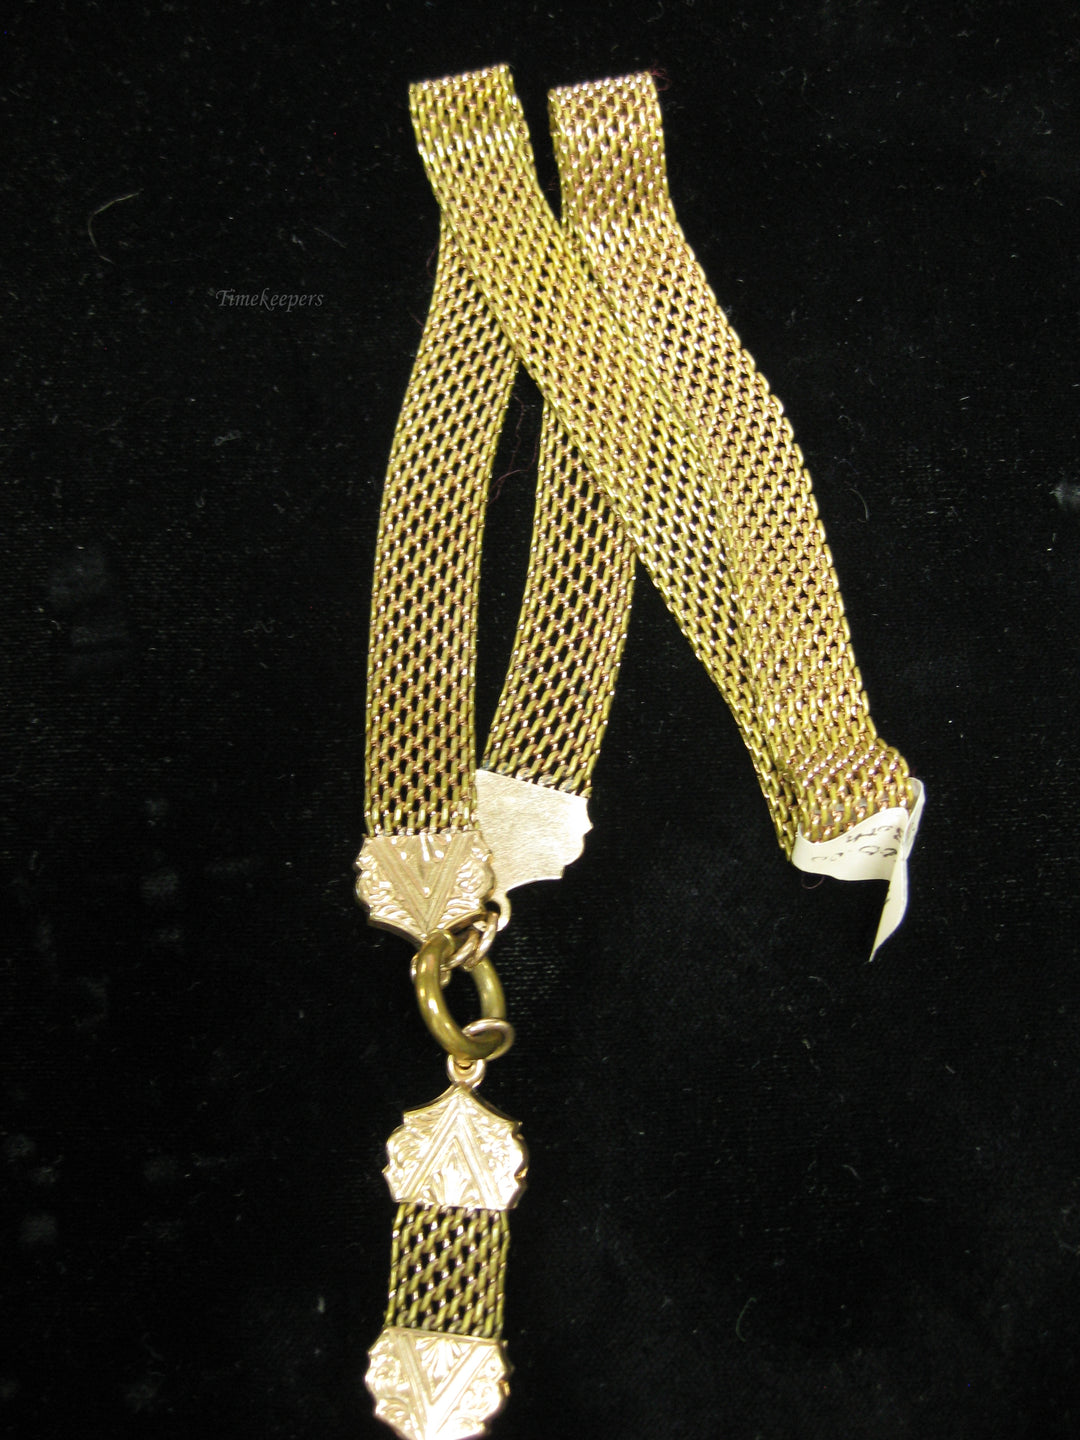 j154 Gorgeous Pendant Watch with Mesh Neck Chain Gold Filled from 1919